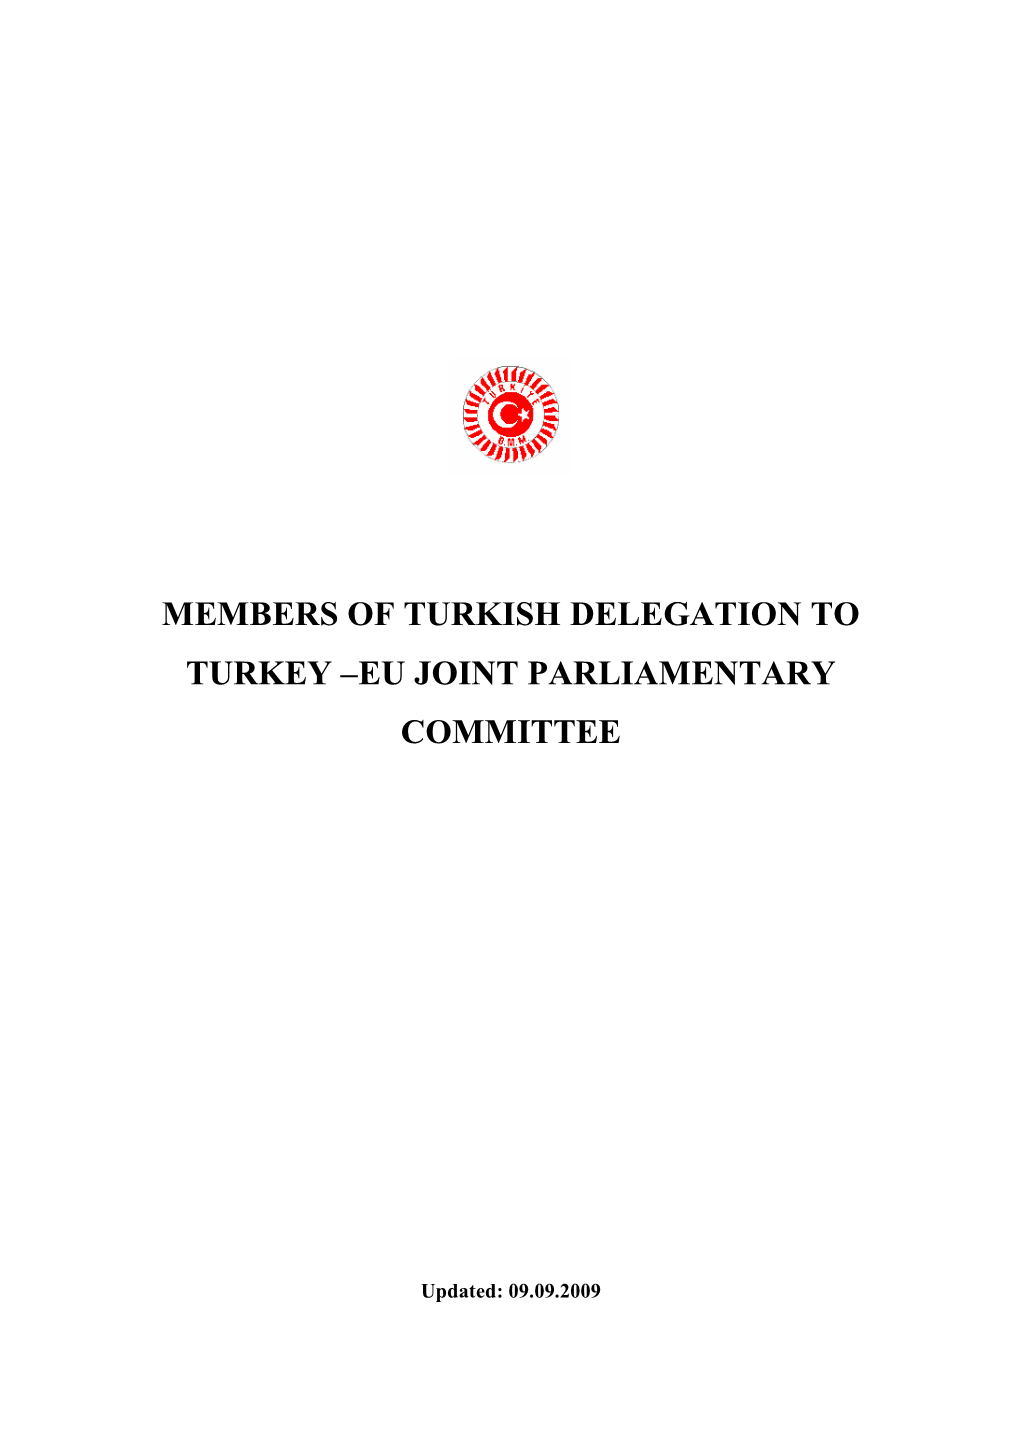 Members of Turkish Delegation to Turkey –Eu Joint Parliamentary Committee